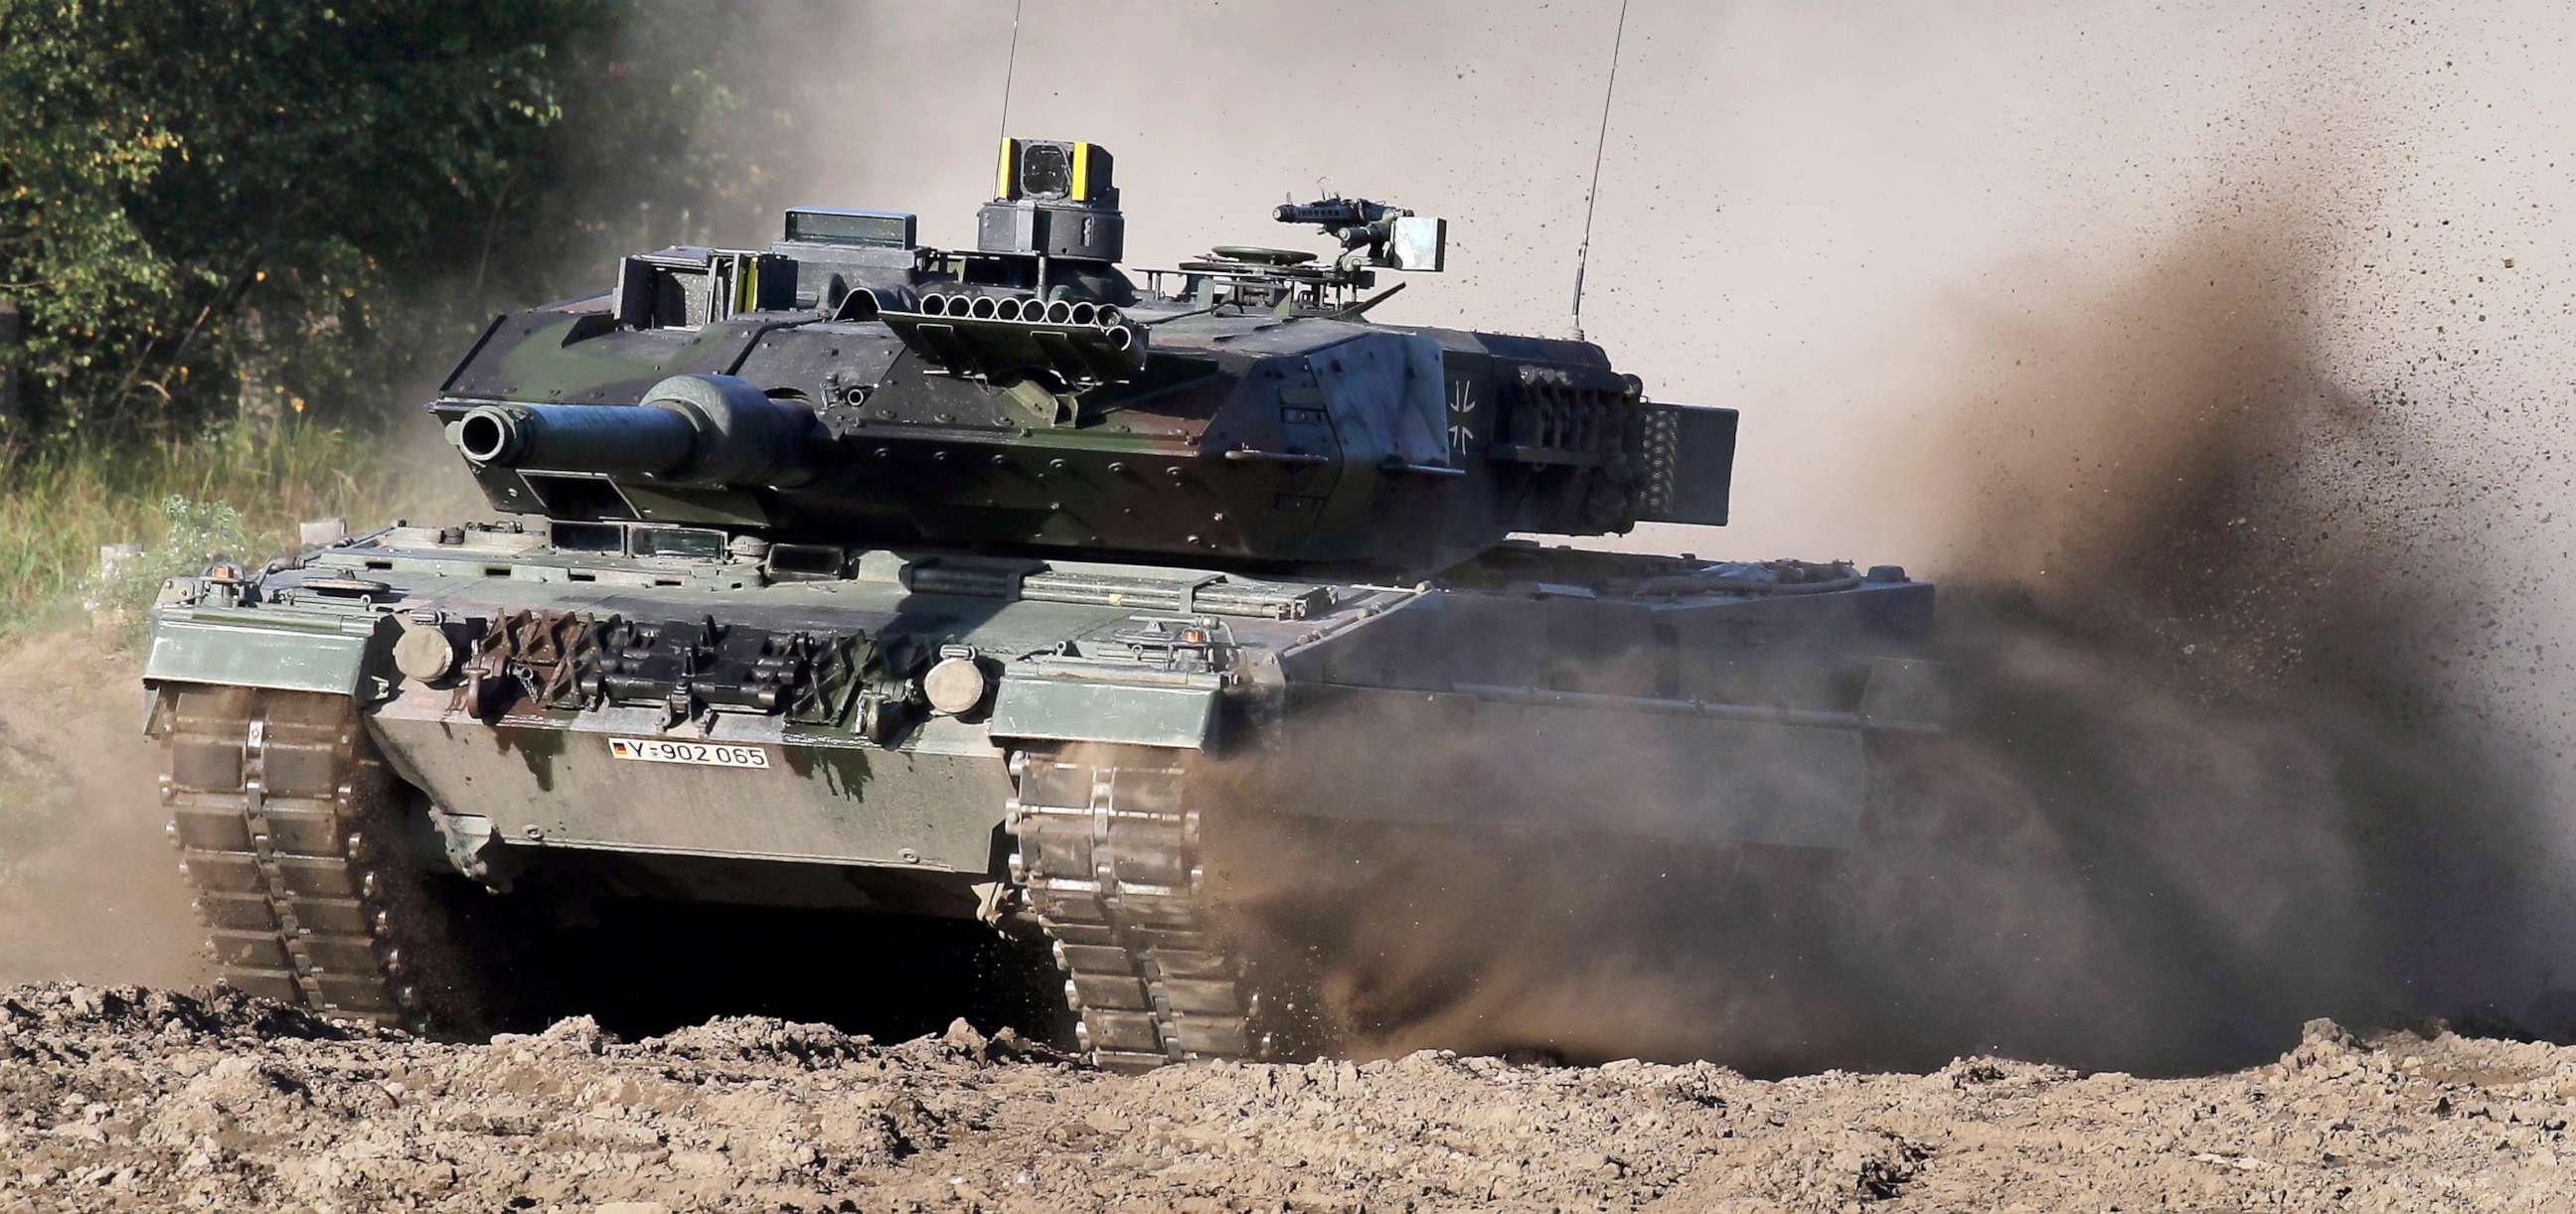 PHOTO: A Leopard 2 tank is pictured during a demonstration event held for the media by the German Bundeswehr in Munster near Hannover, Germany, Sept. 28, 2011.